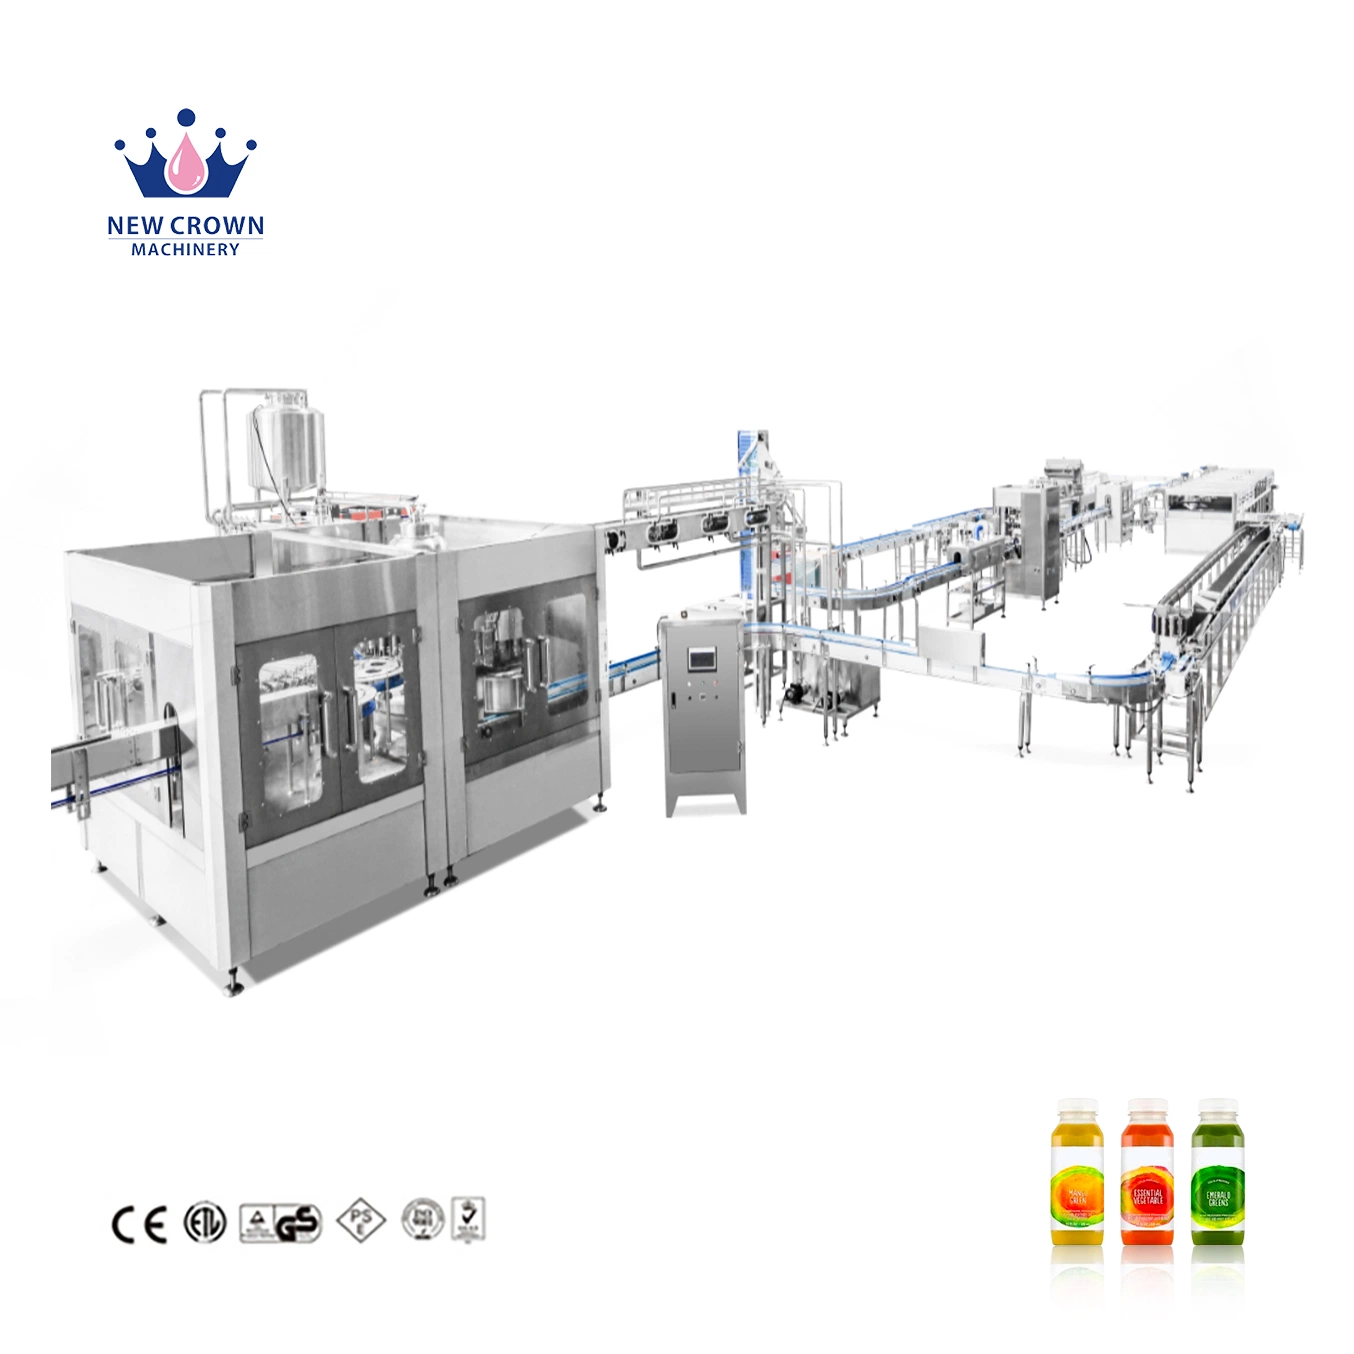 Complete Turnkey High Speed Automatic Fruit Hot Juice Production Line Pet Plastic Bottle Bottling Beverage Liquid Filling Packing Package Machine